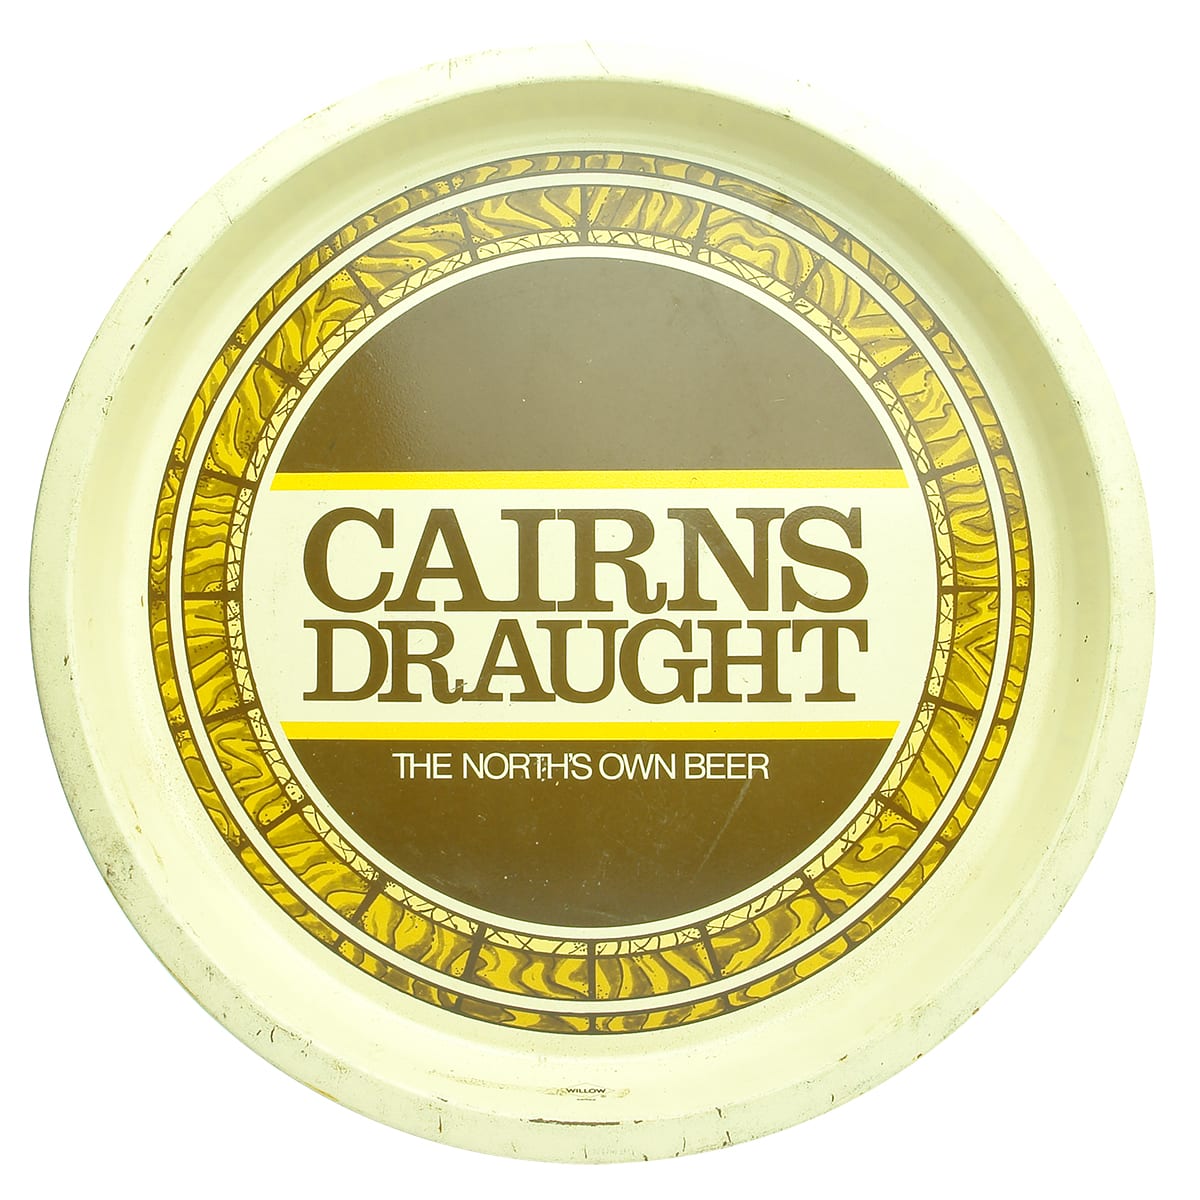 Tray. Cairns Draught, The North's Own Beer.